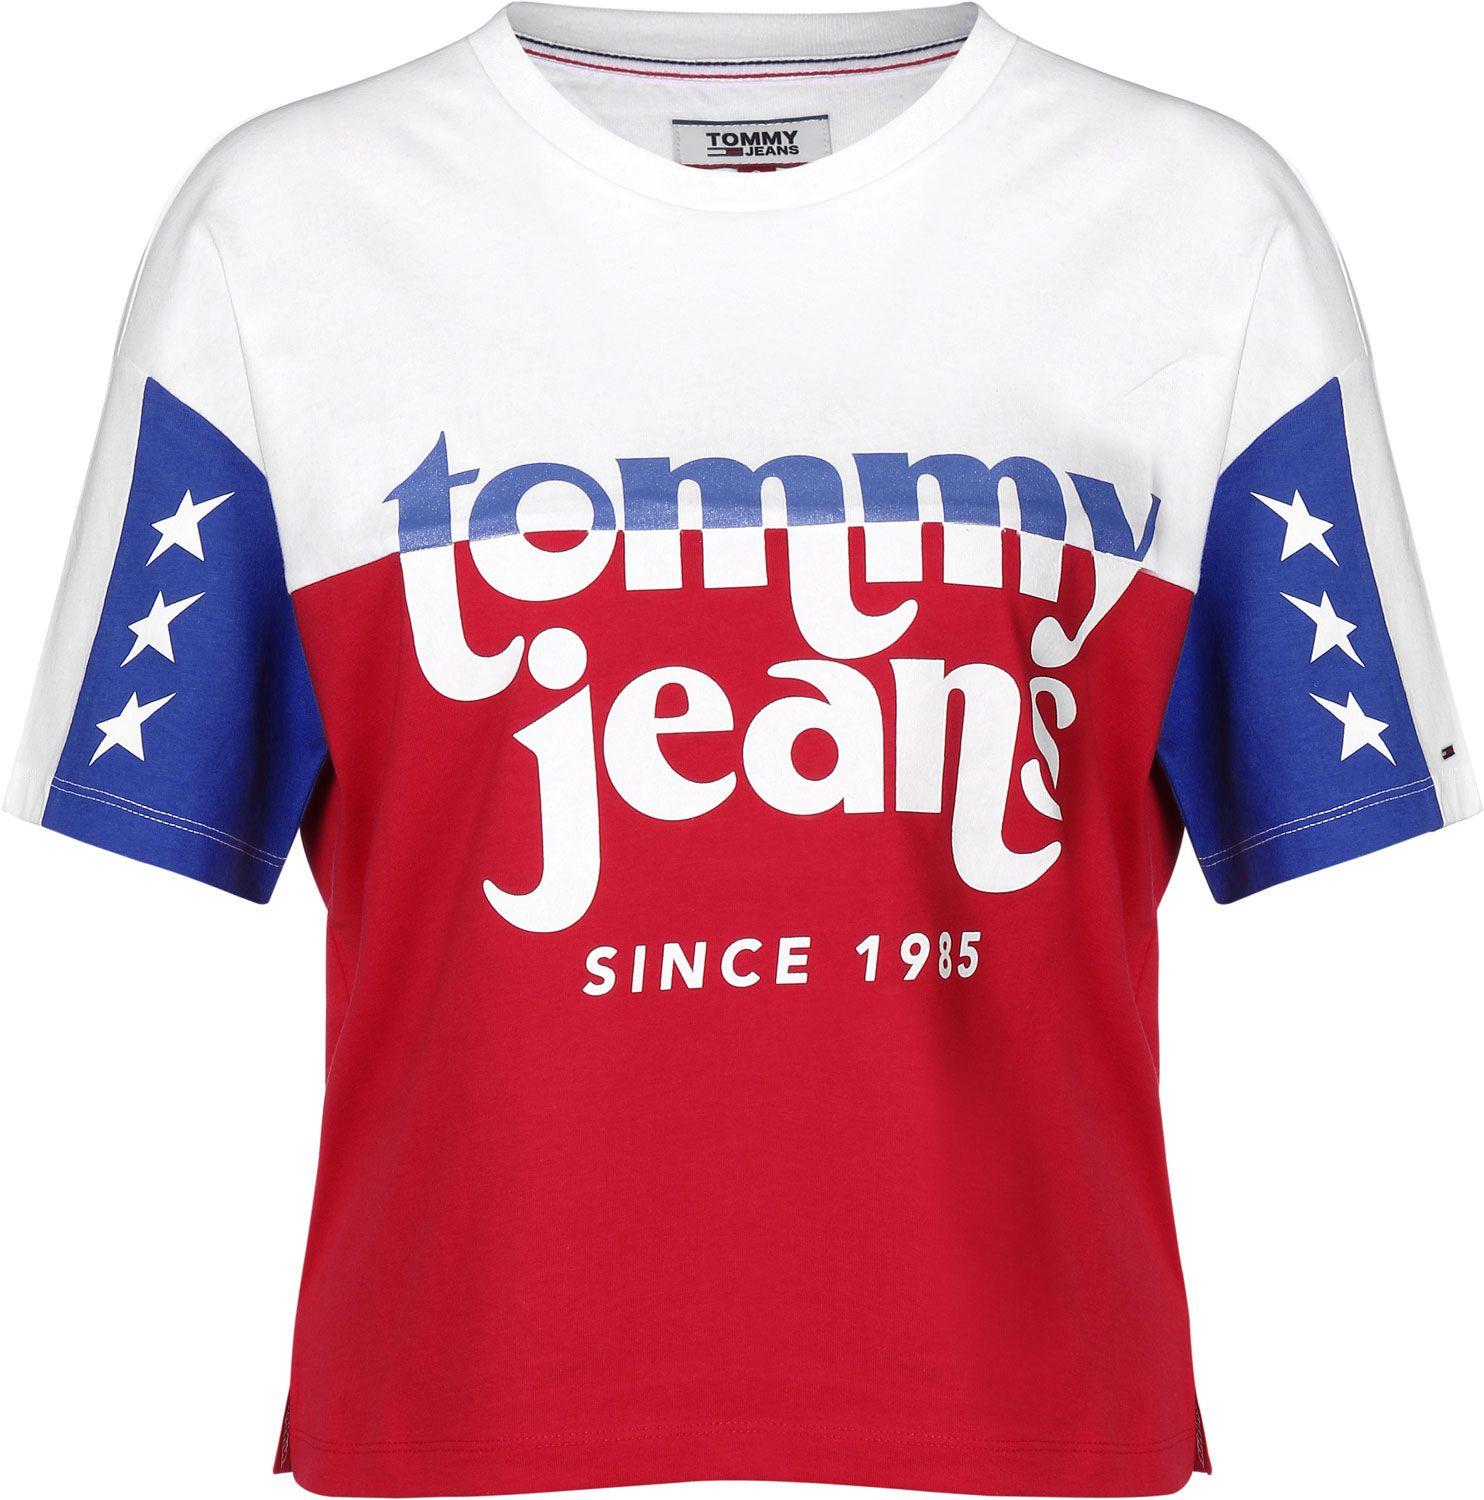 Red White and Blue Clothing Logo - Tommy Jeans Color Block Logo W T-shirt red white blue fashion JE56056